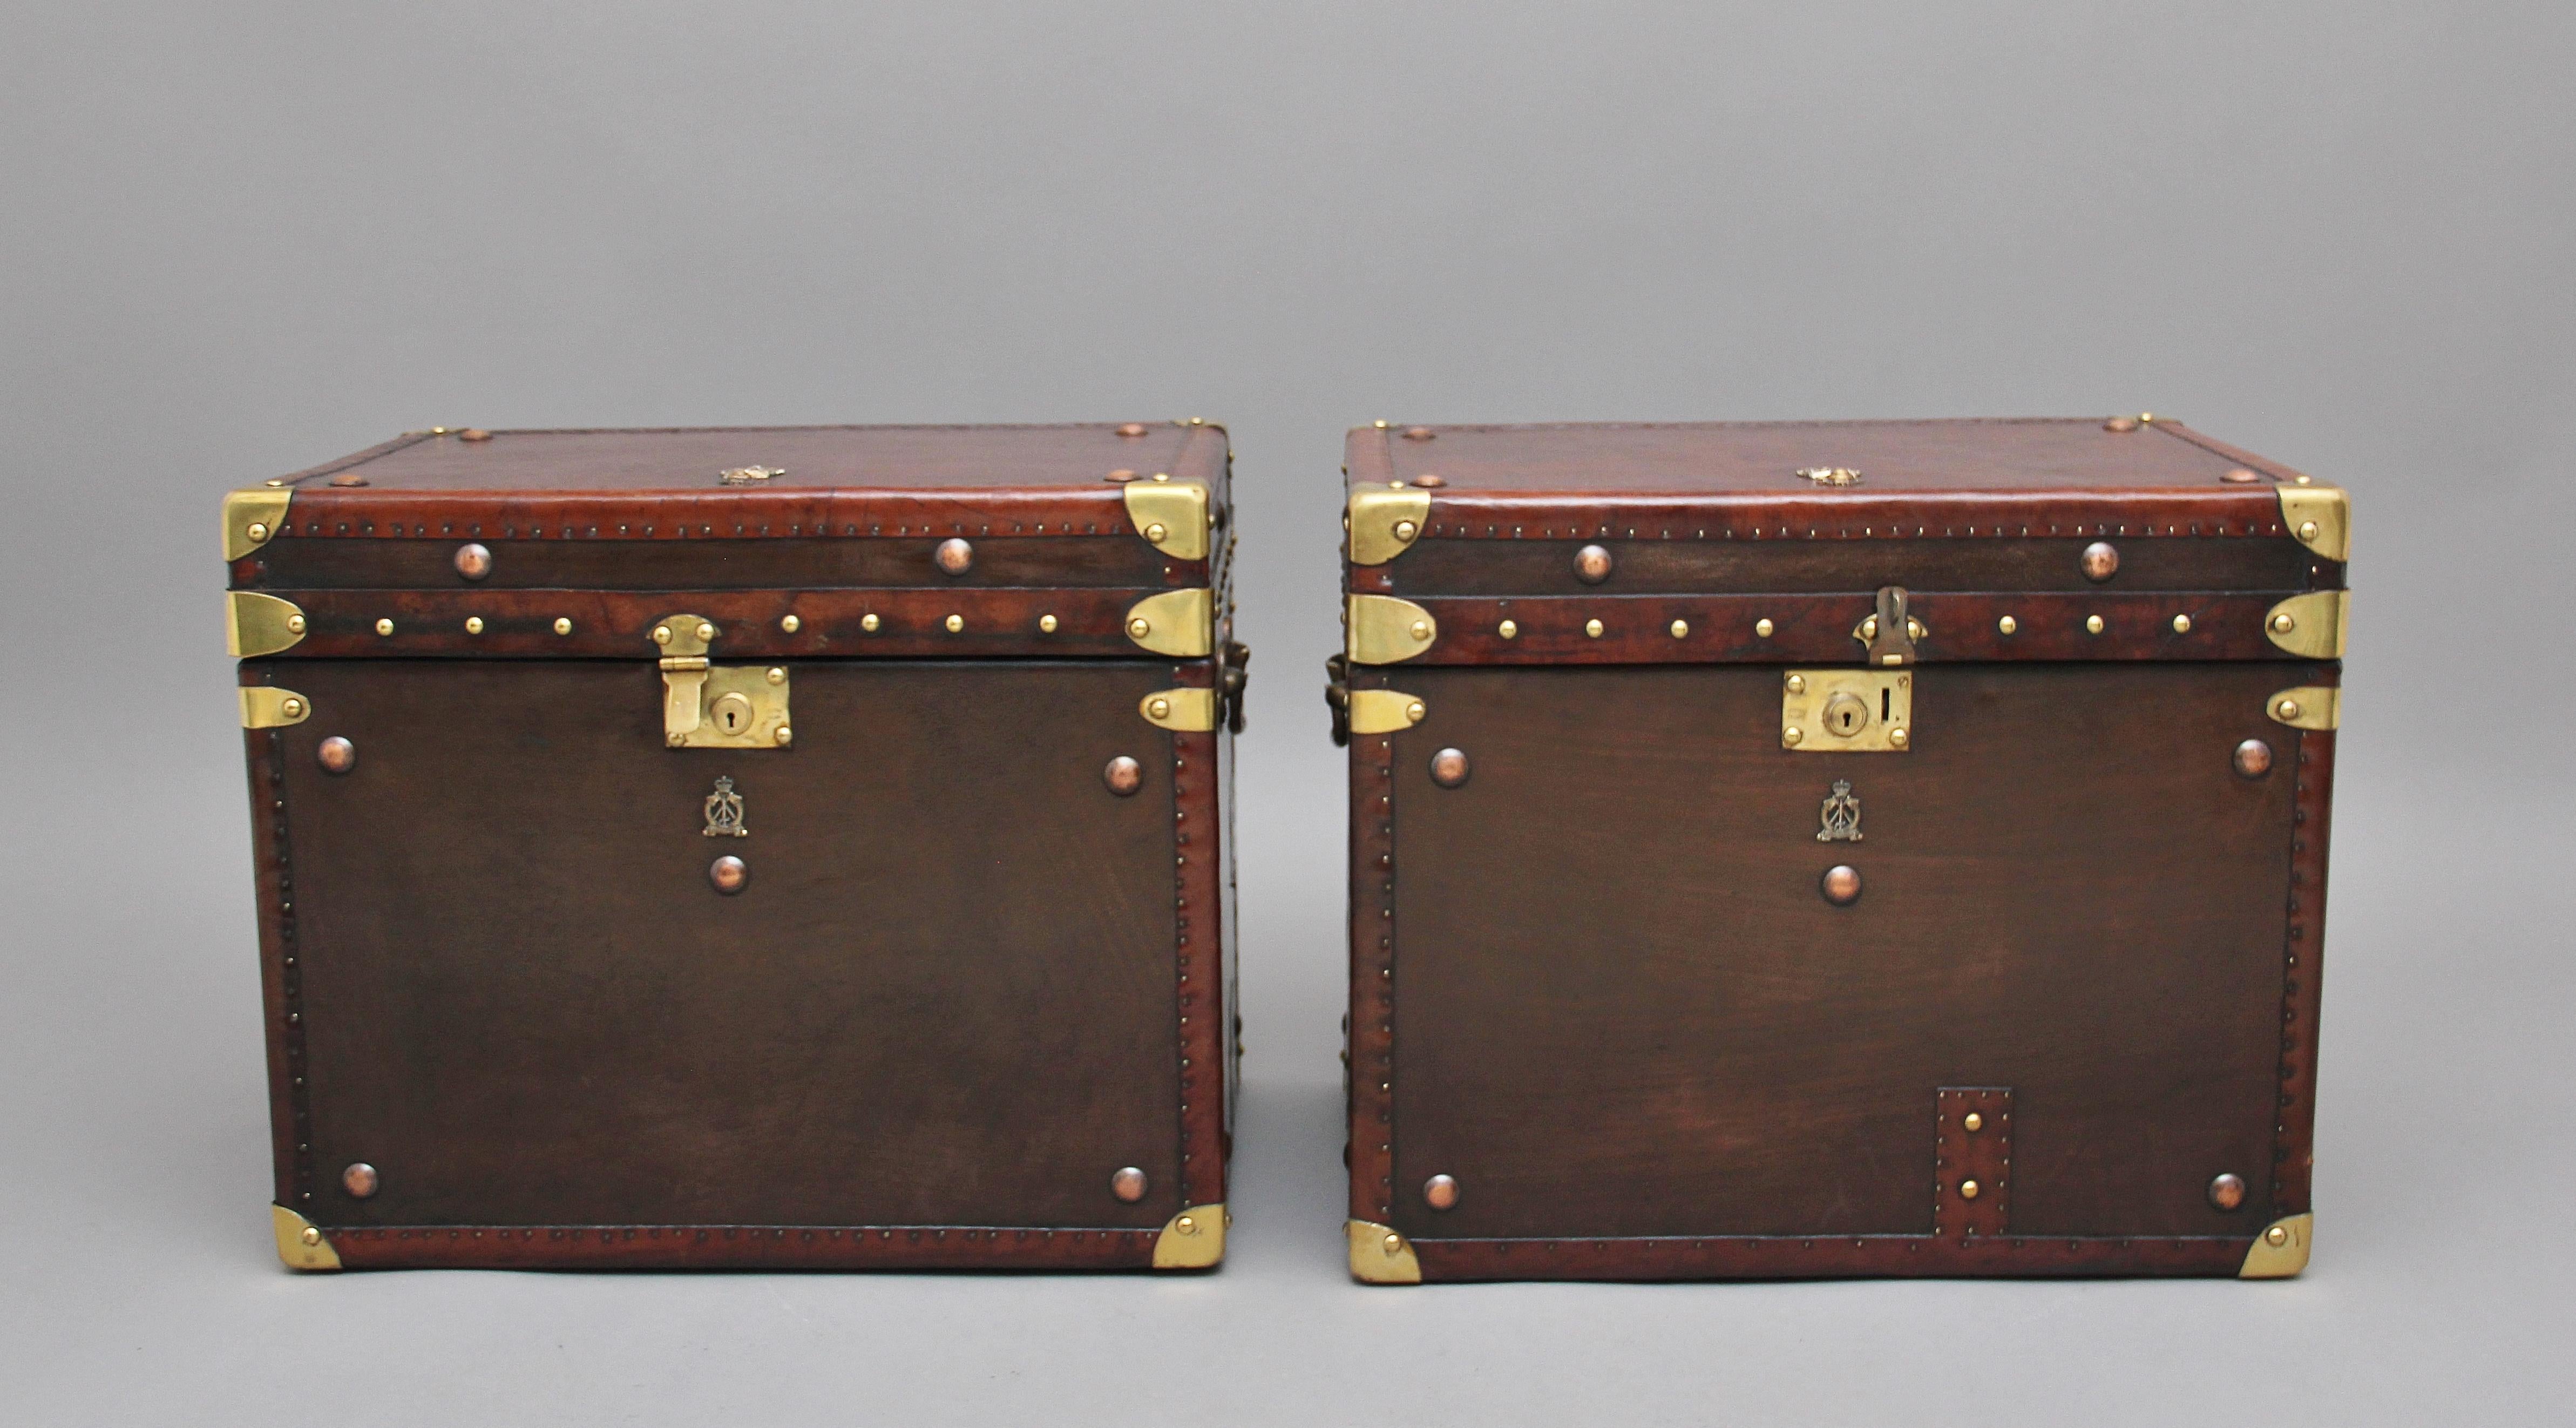 A fabulous pair of early 20th century leather bound ex army trunks with brass straps and corners, copper studs and brass carrying handles on the sides, the trunks opening to reveal a nice dark blue lined interior, on the top and front of the trunks